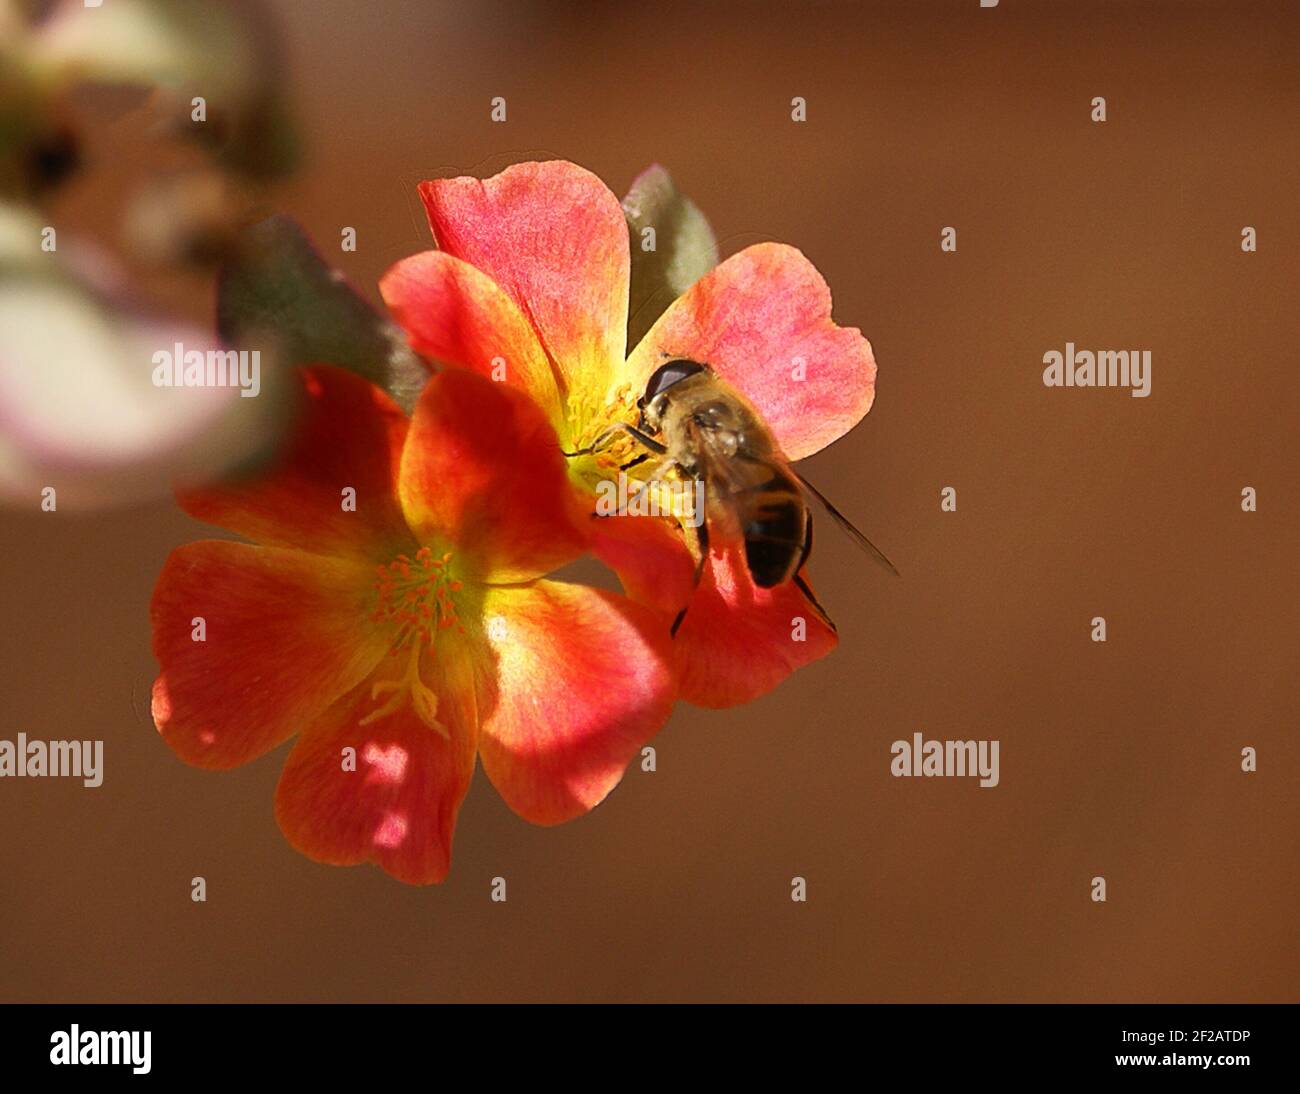 Common honeybee on a small red flower Stock Photo